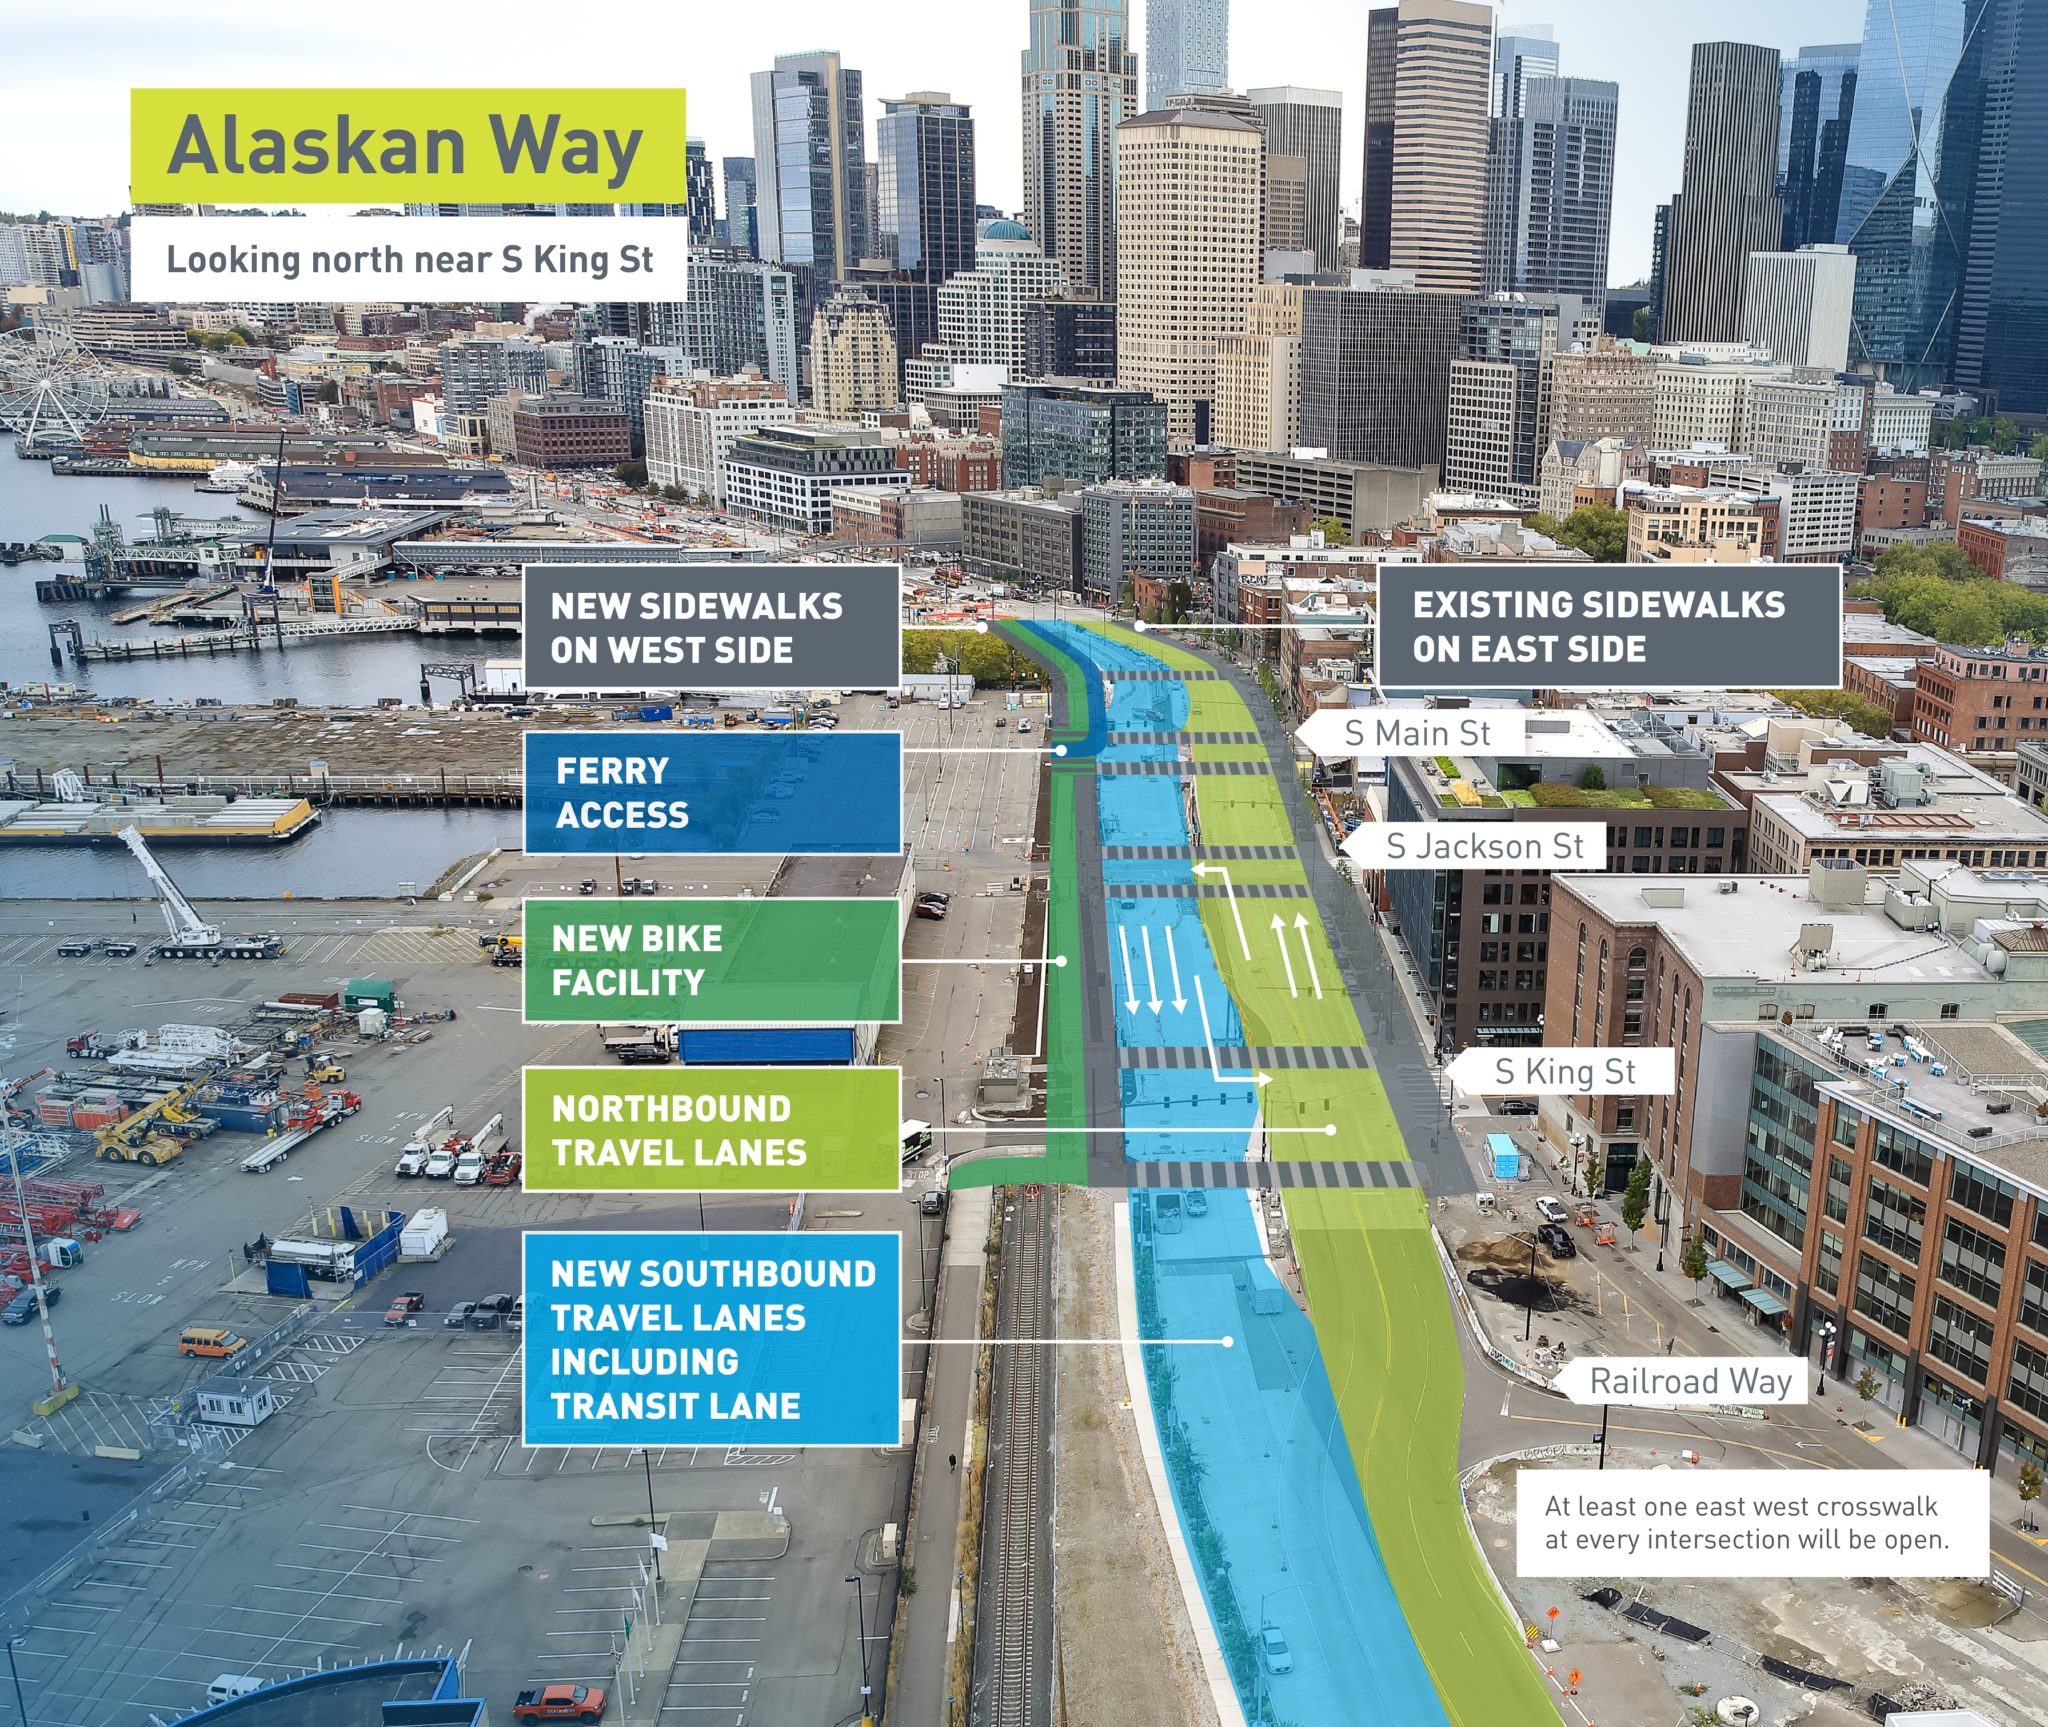 Graphic showing the planned configuration of Alaskan Way S, following an upcoming traffic shift planned as part of construction of the Waterfront Seattle Program. Blue and light green colored highlighting shows vehicular travel lanes; dark green shows new bike facility areas on the west side of the road, and dark gray highlighting shows existing sidewalks on the east side of the roadway. Other buildings and waterfront area are visible on either side of the roadway.